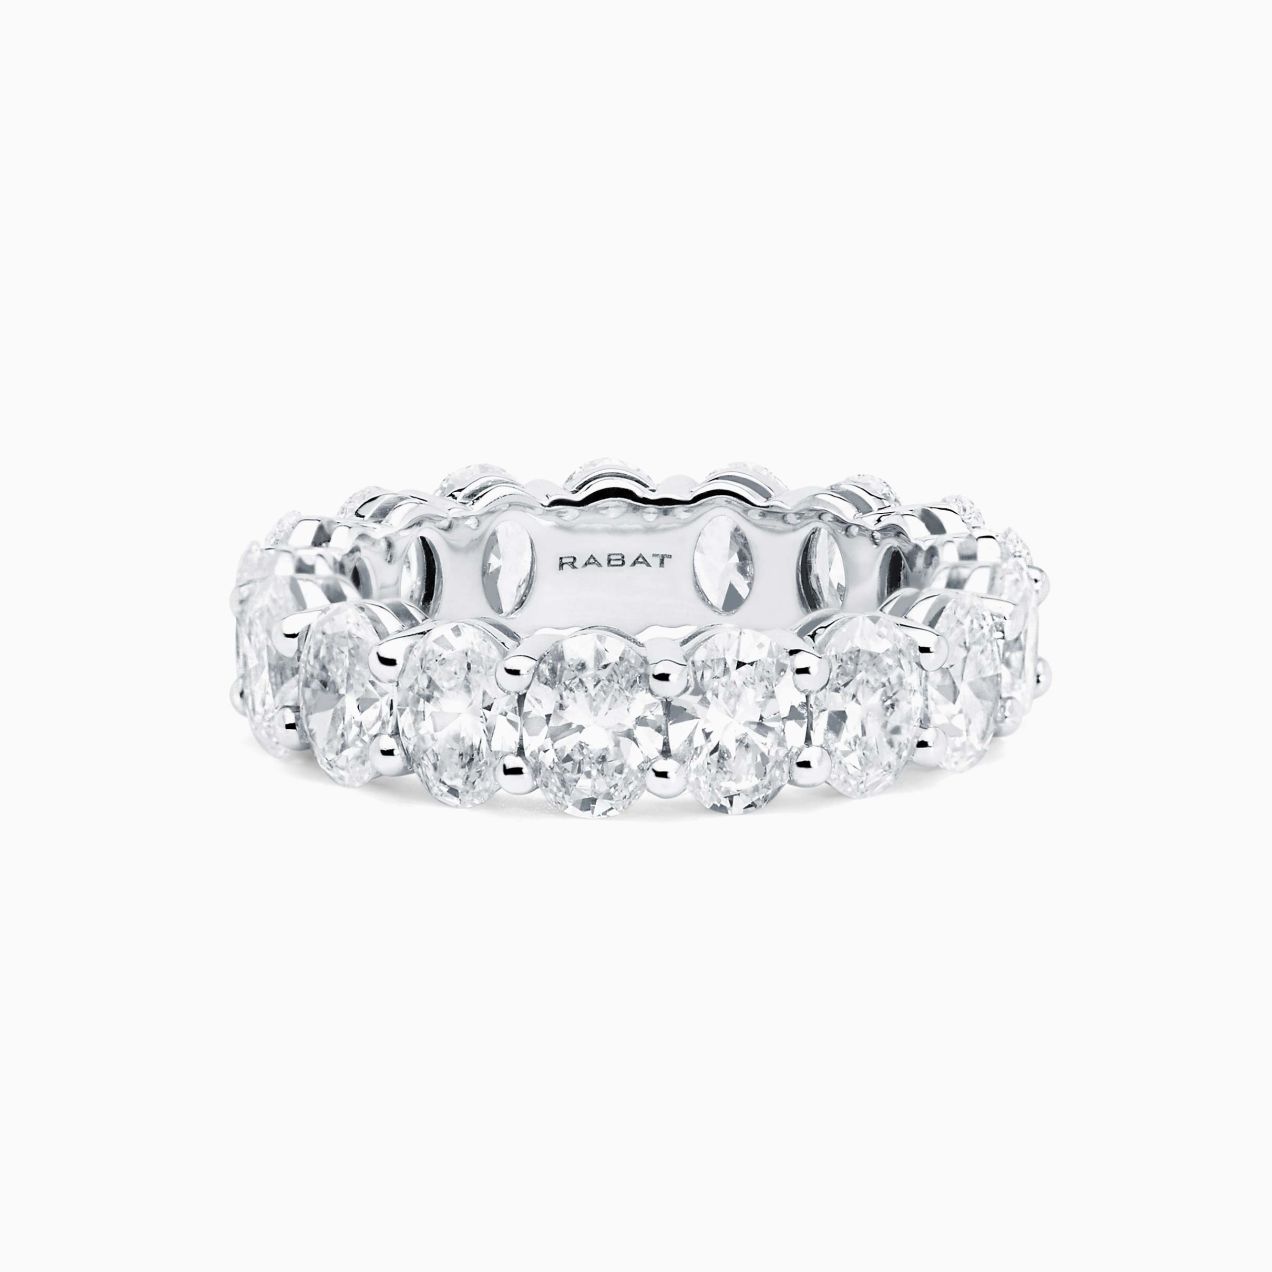 White gold wedding band ring with oval cut diamonds